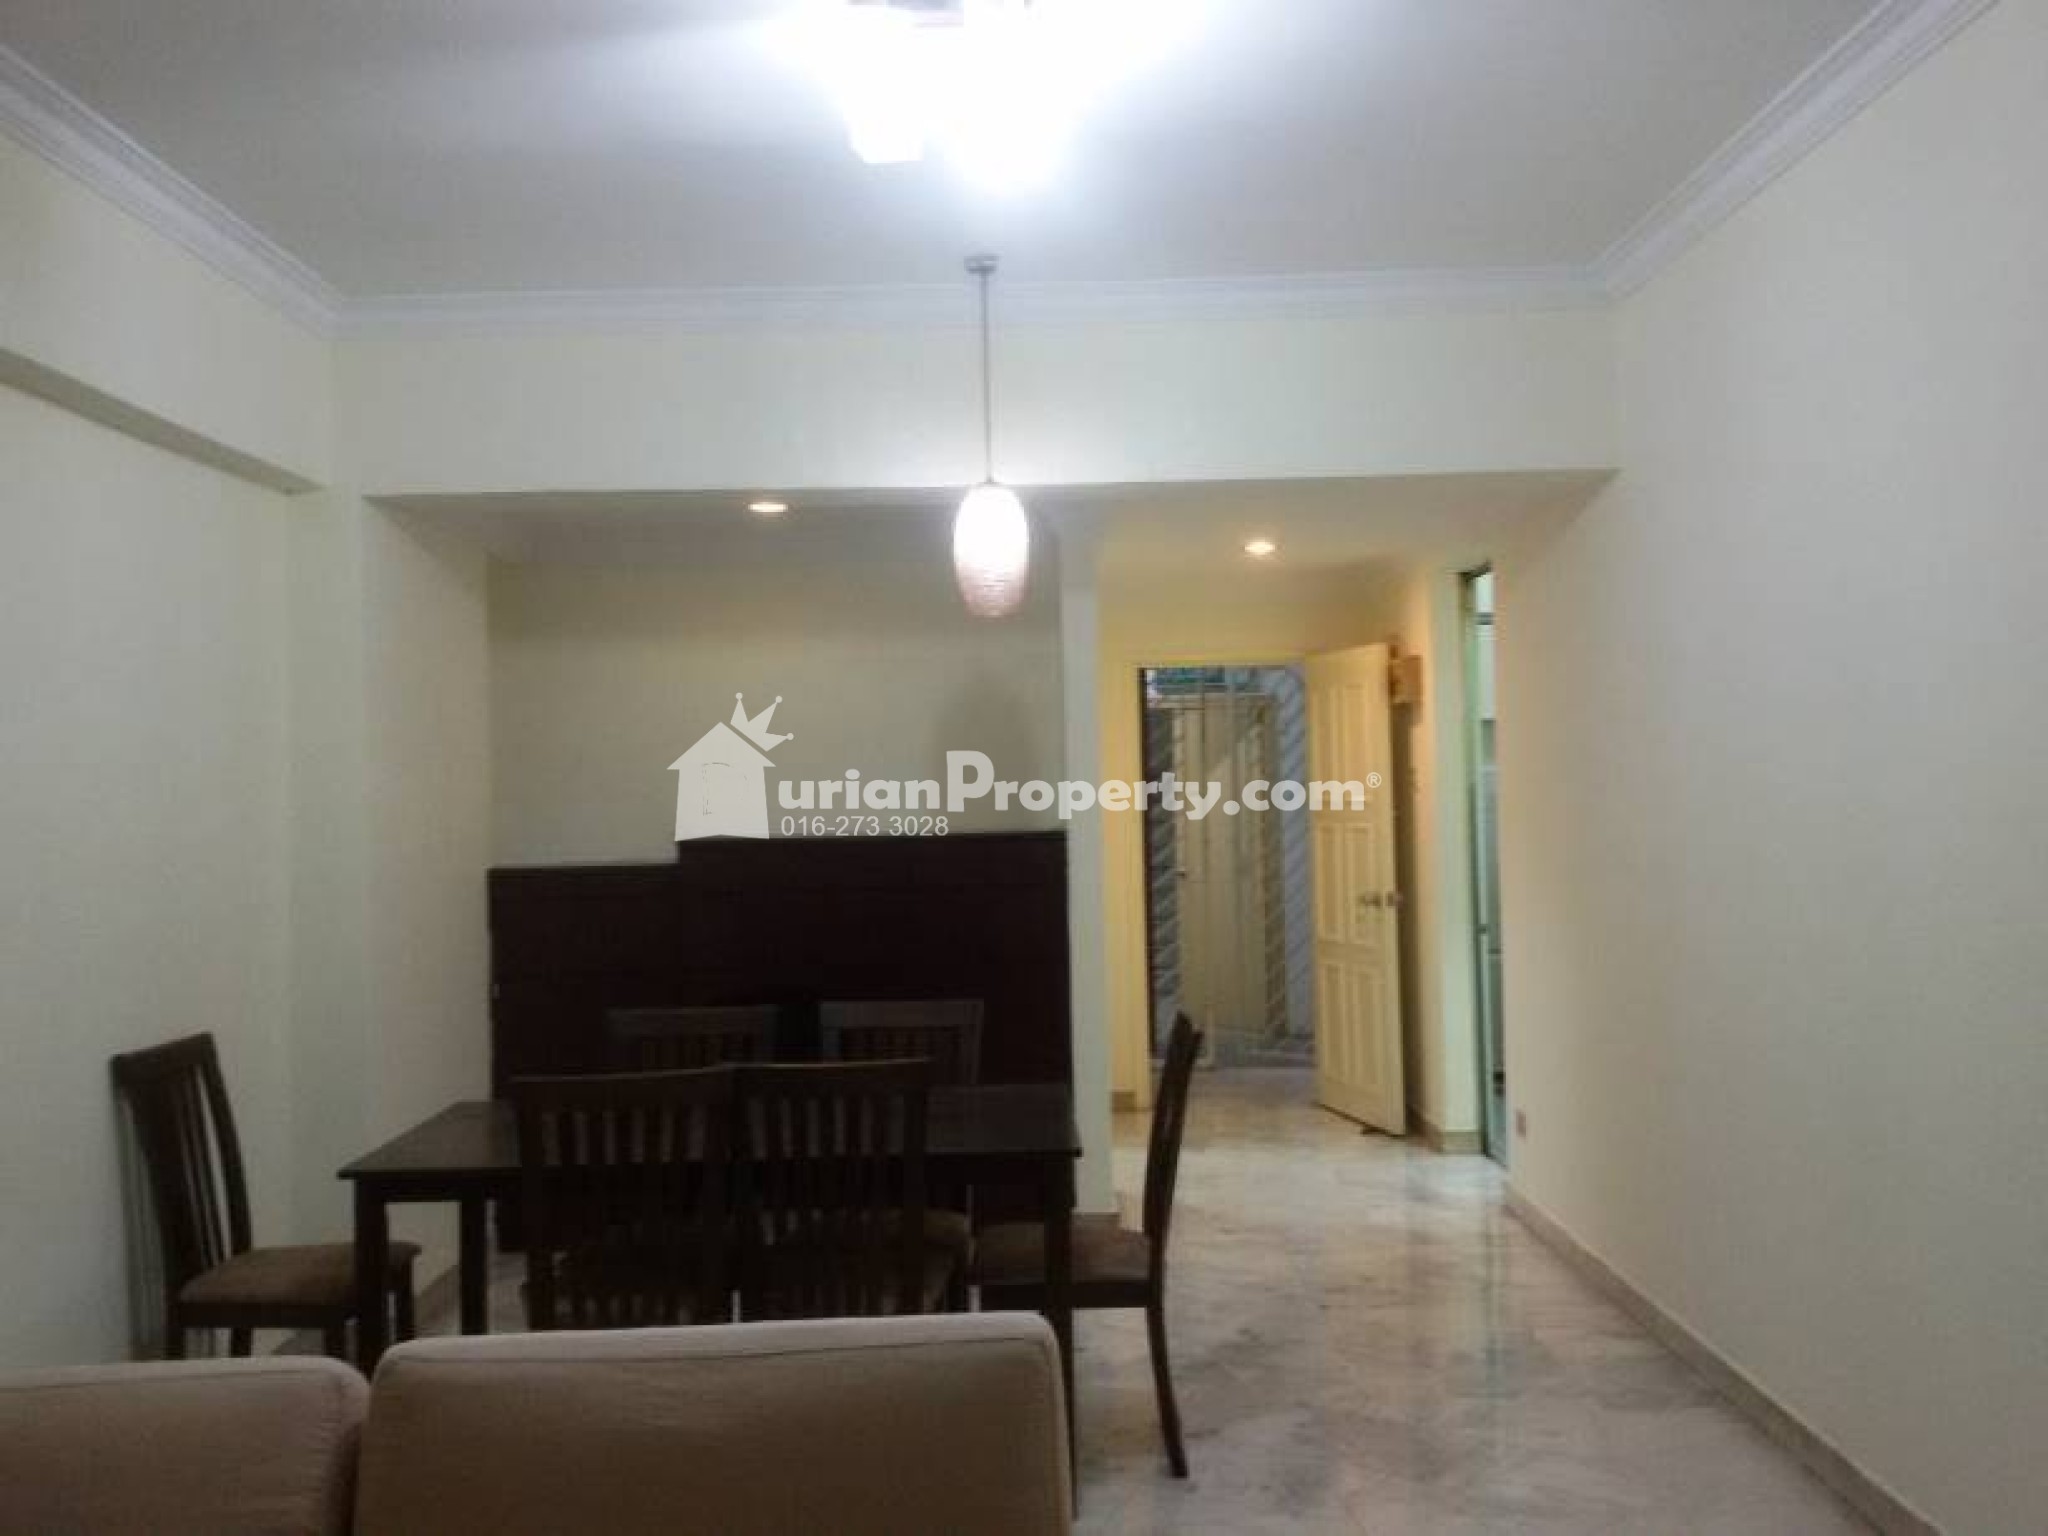 Condo For Sale at Meadow Park 2